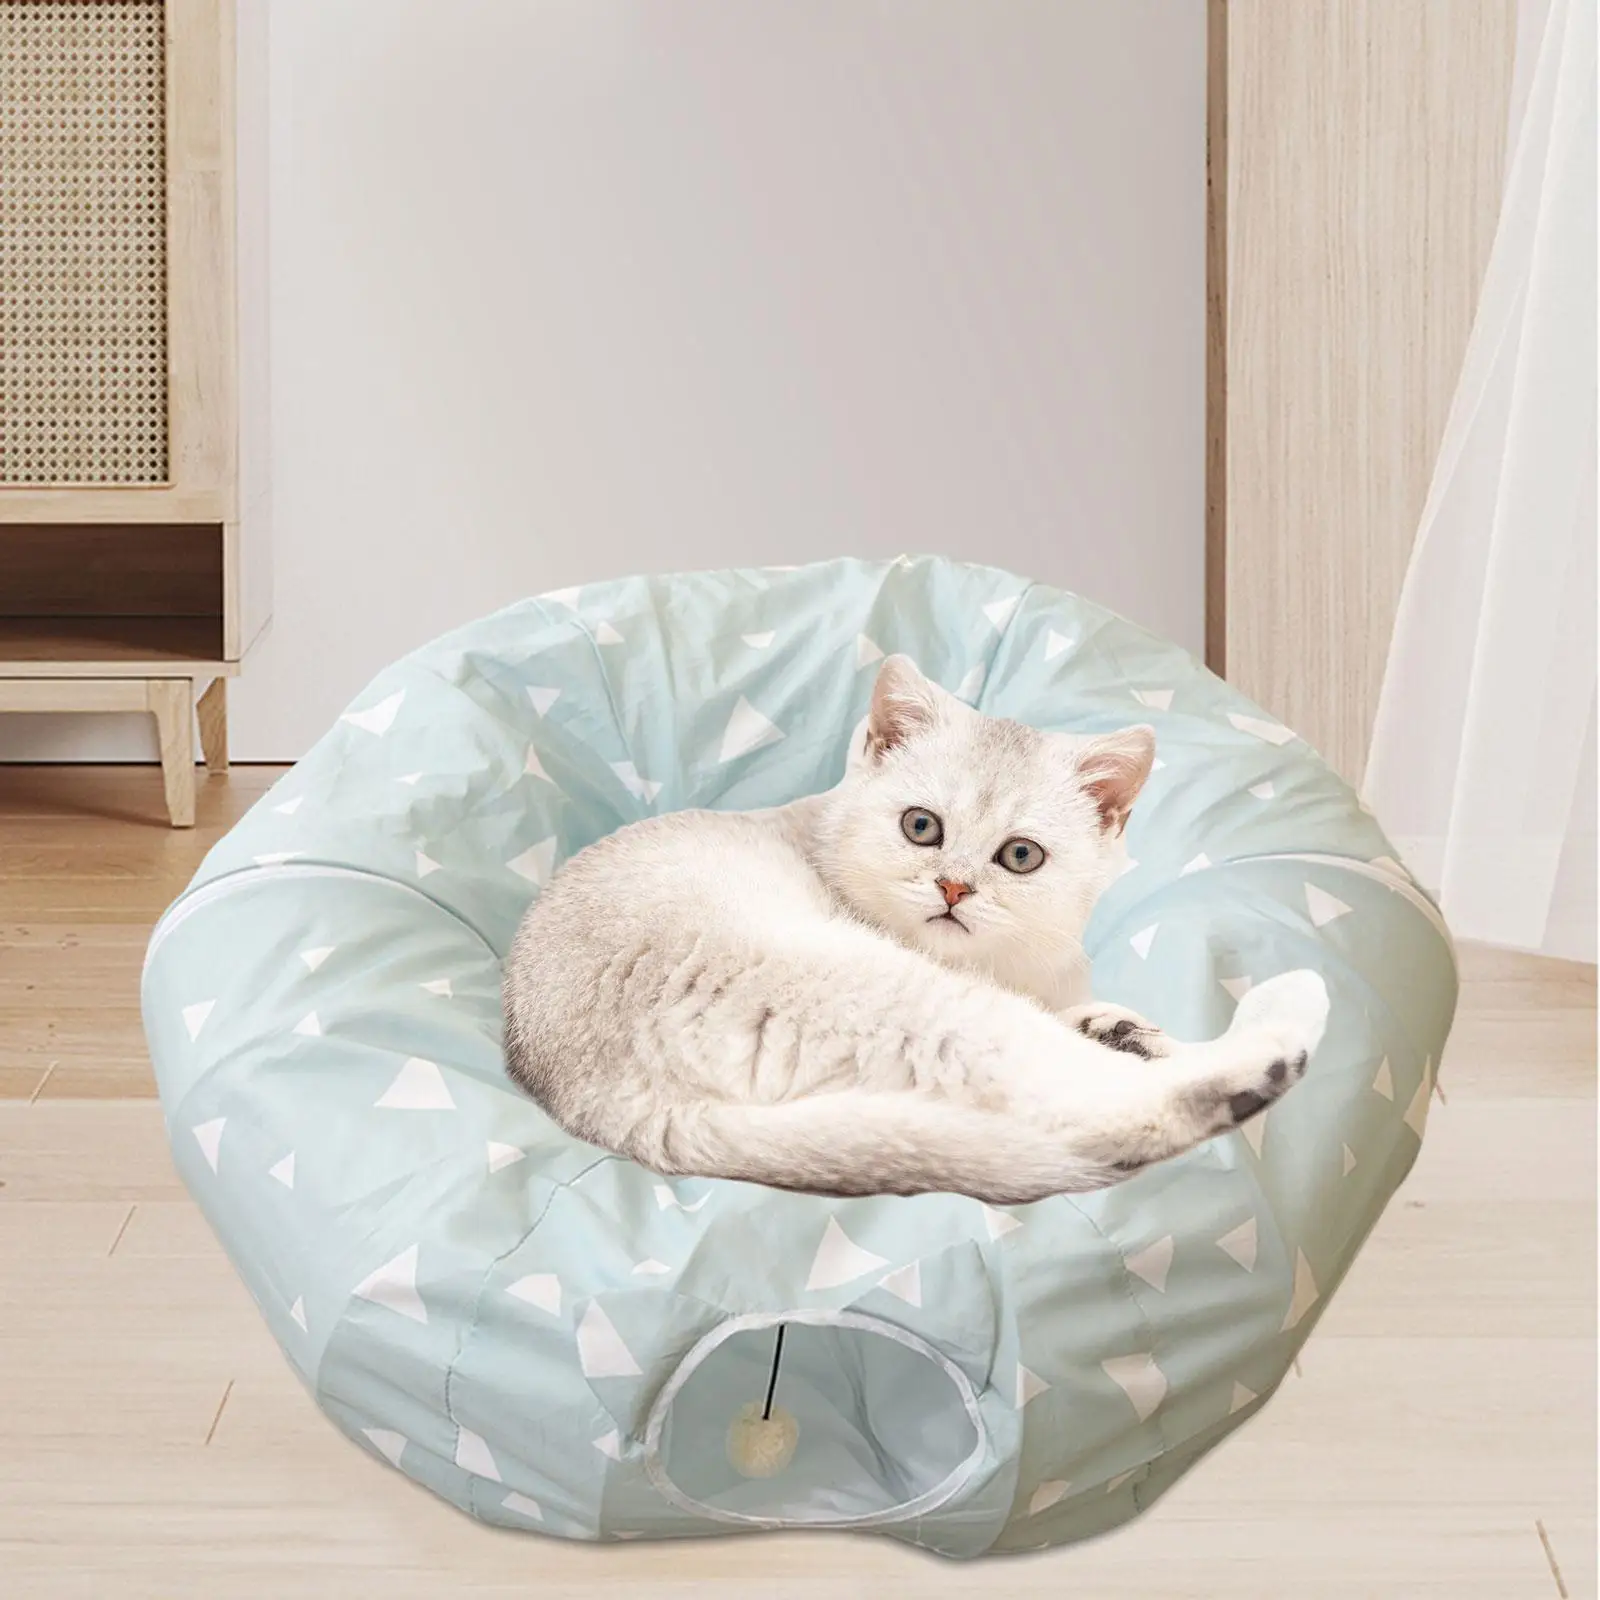 Cat Tunnel Bed Collapsible with Hanging Ball Comfortable Cat House Pet Cat Bed for Kitten Bunny Indoor Cats Small Animals Ferret